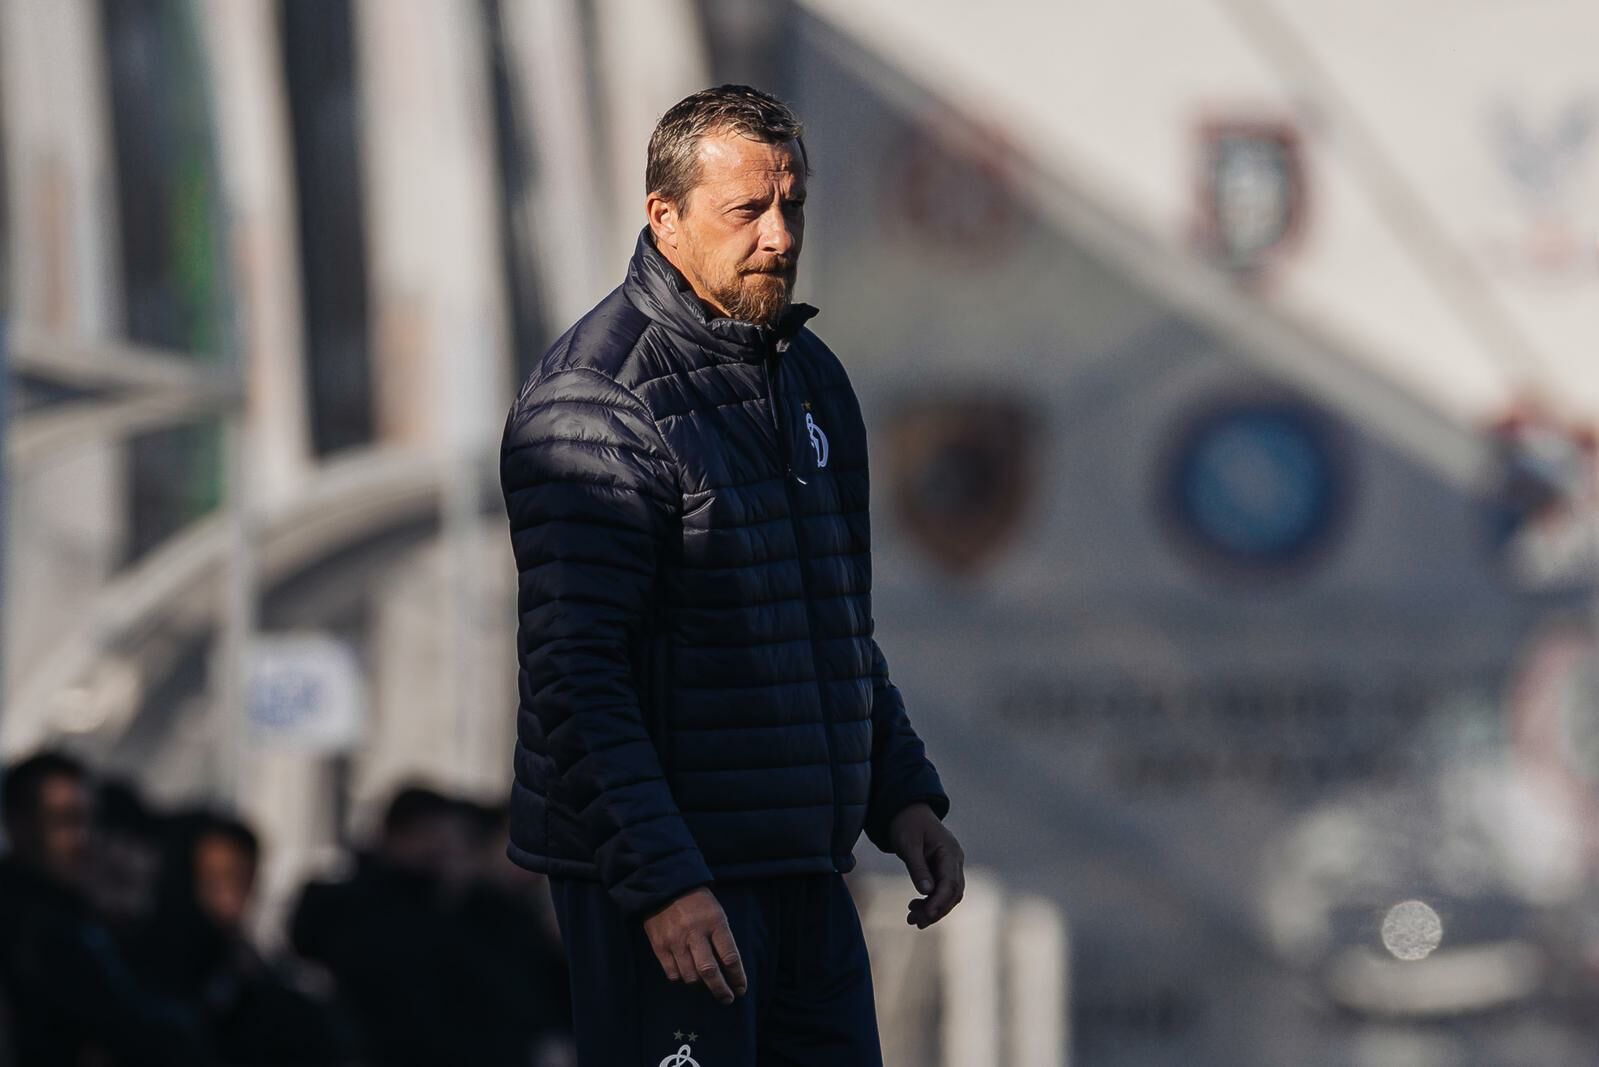 Slavisa Jokanovic: My sincere condolences to the relatives and friends of those who died in the earthquake in Turkey